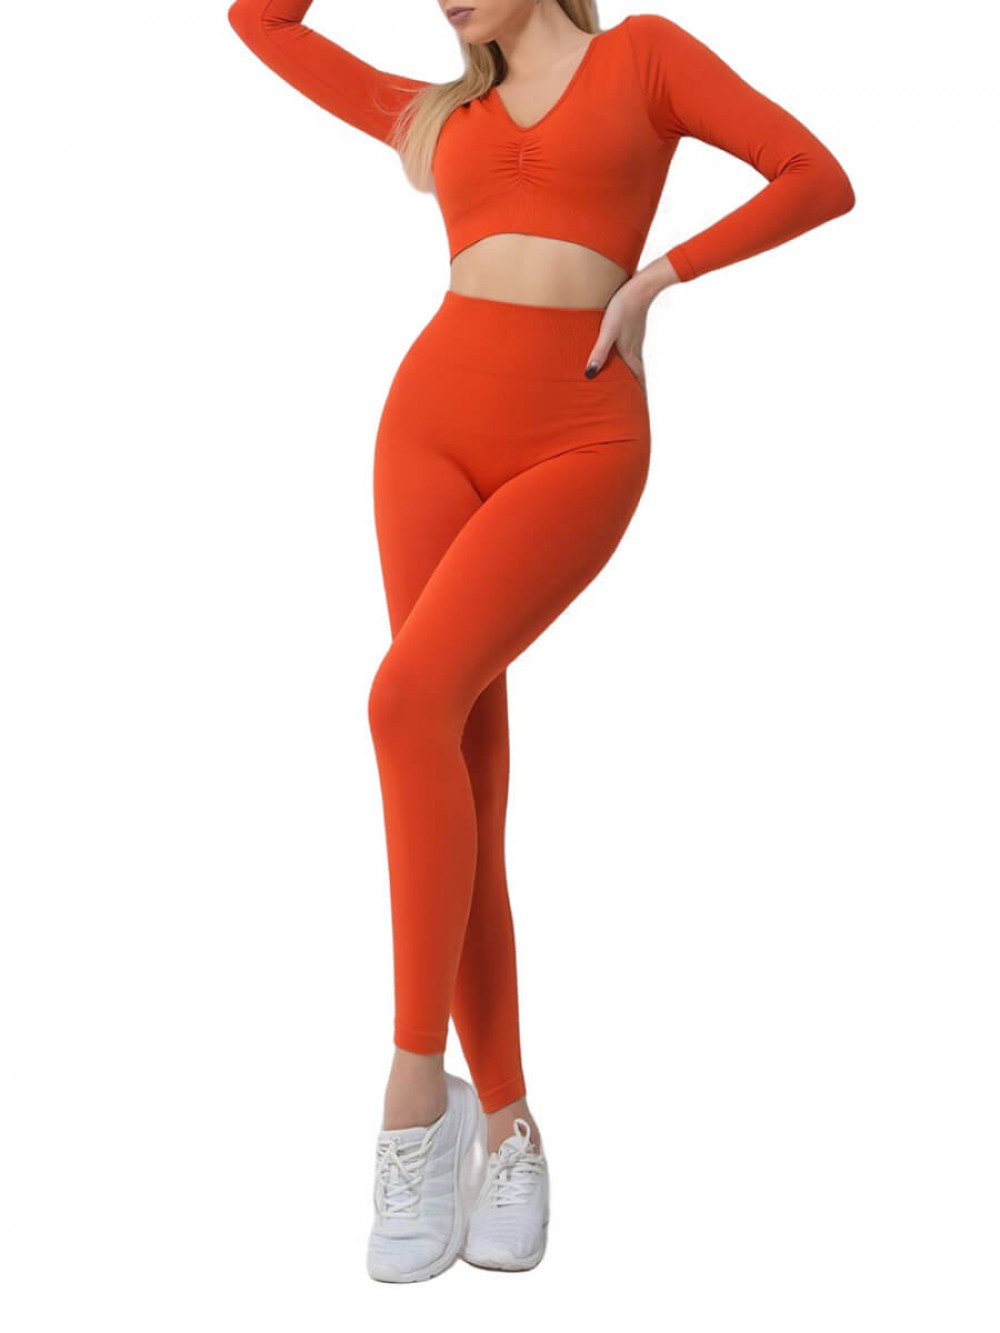 Red Seamless Streetstyle Ultra Stretchy Women Fashion Style